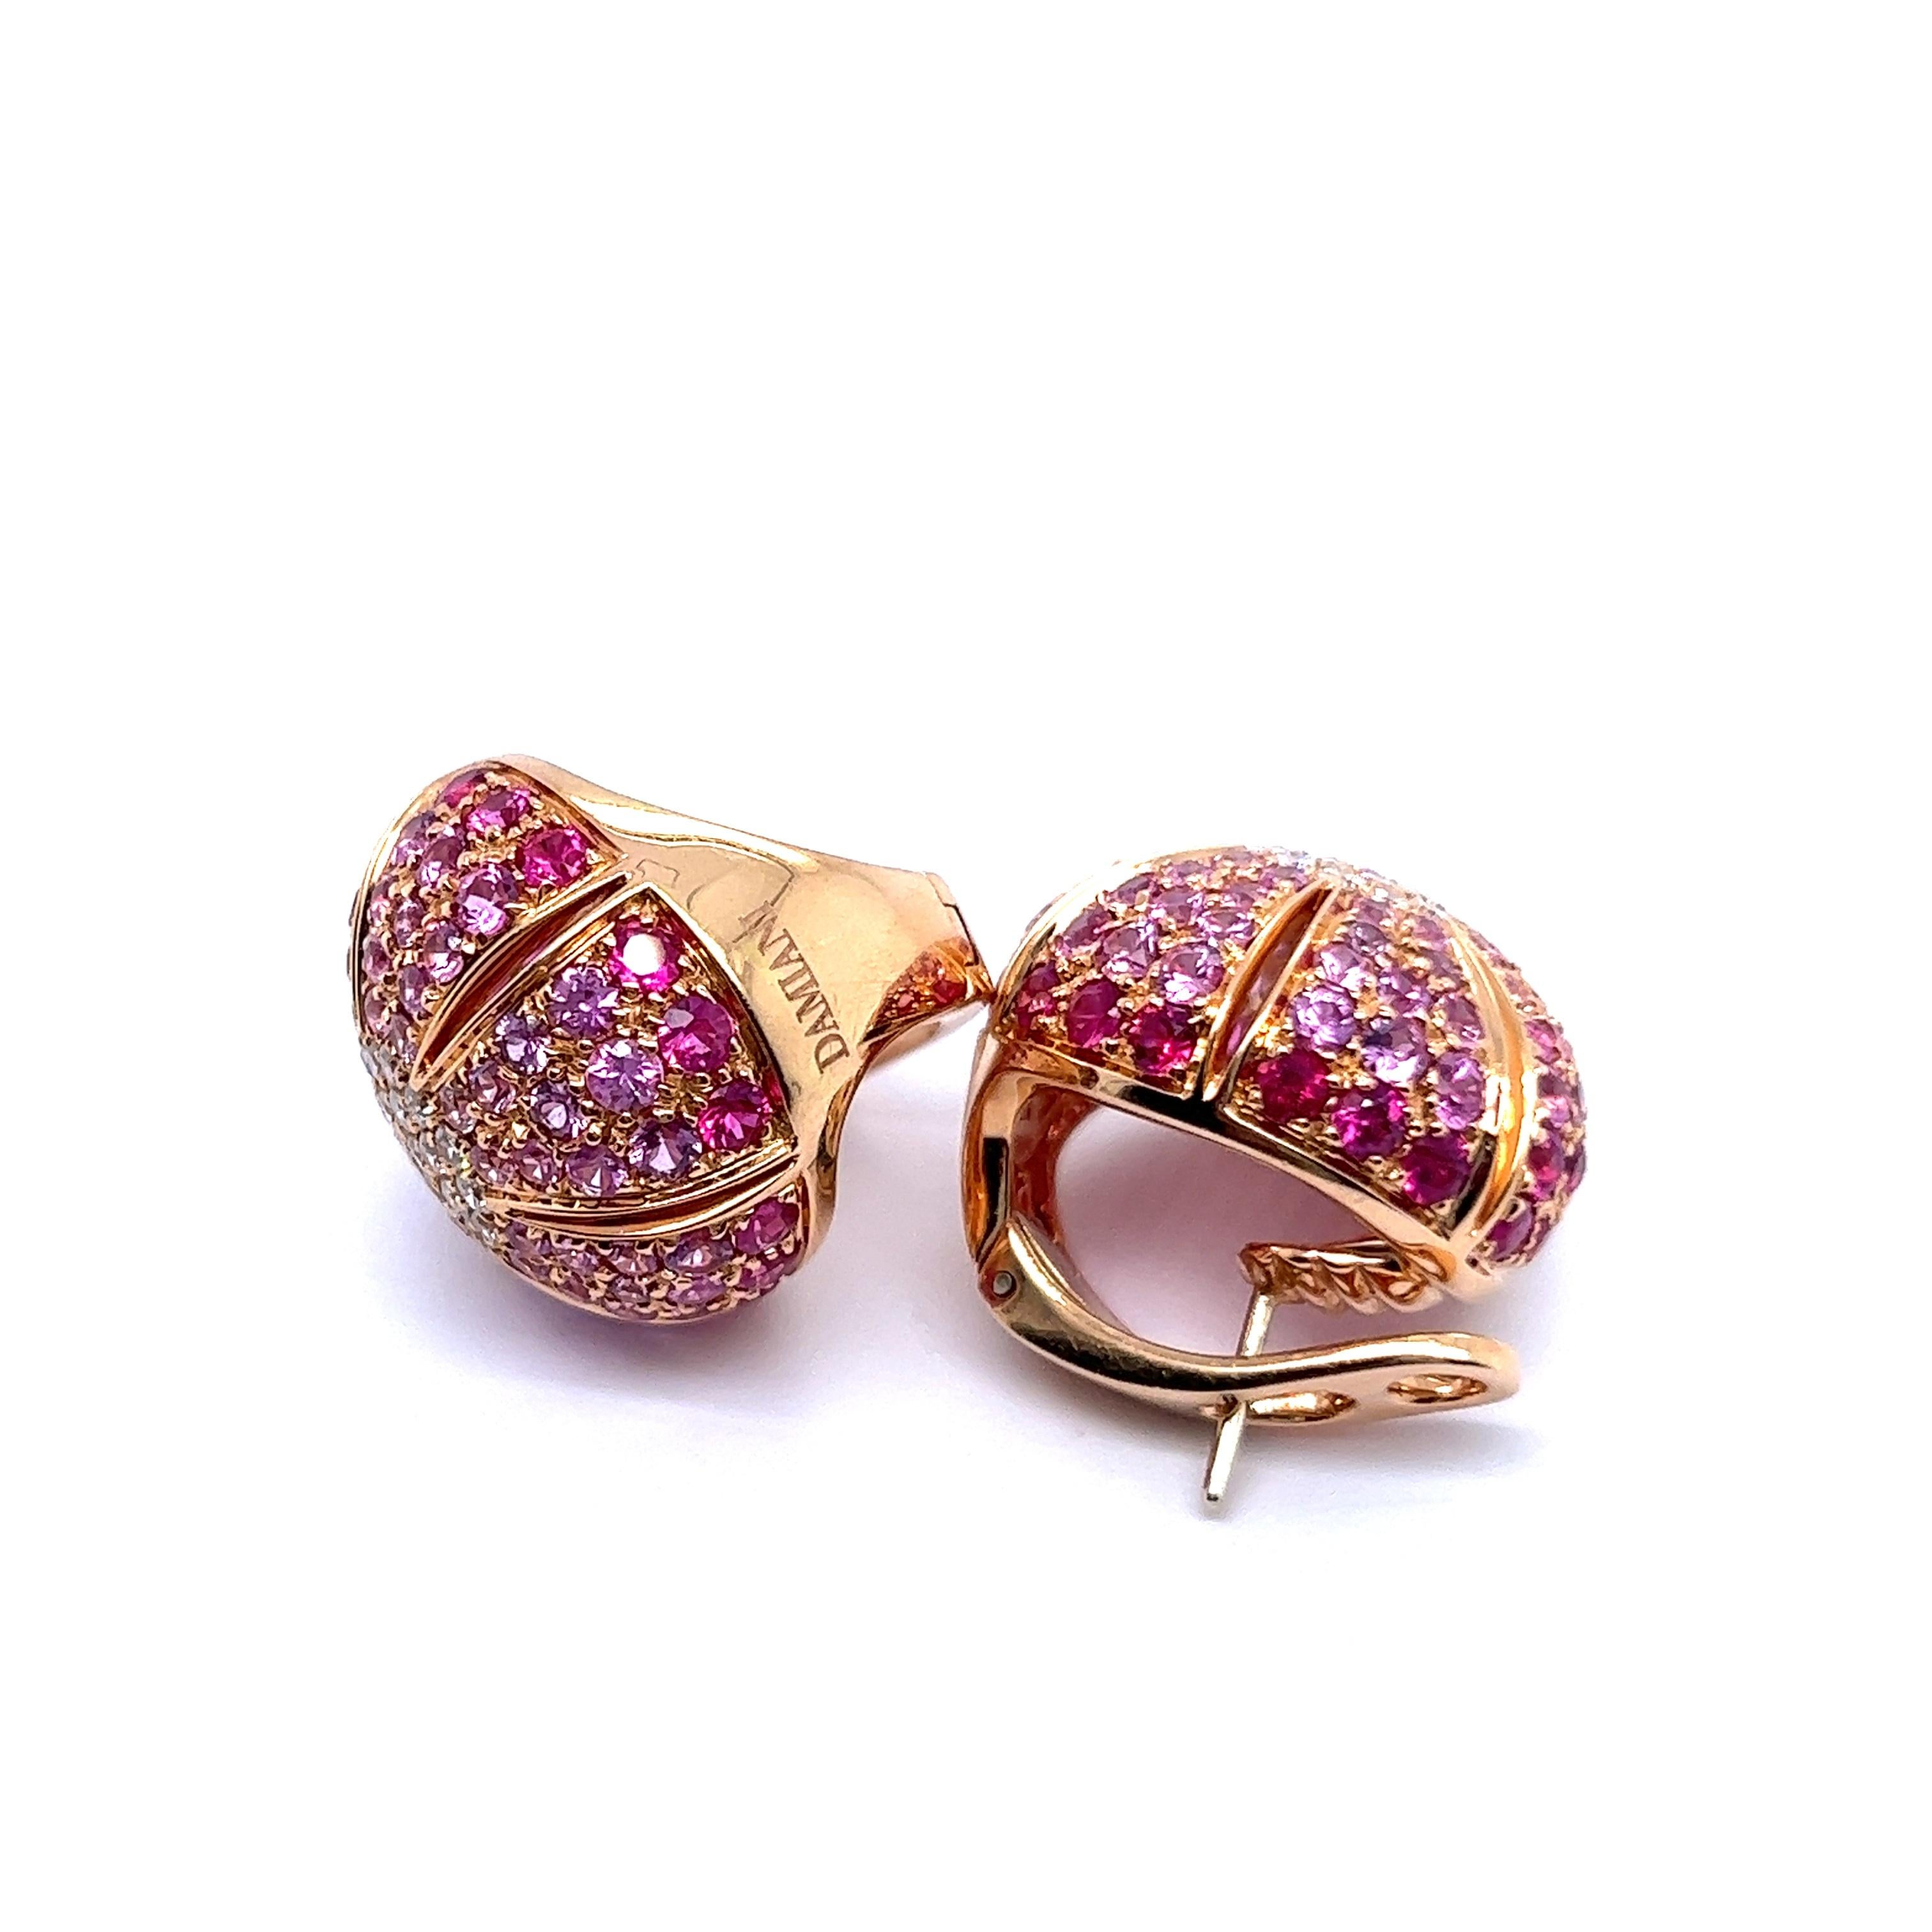 Women's or Men's Earrings with Pink Sapphires & Diamonds in 18 Karat Rose Gold by Damiani